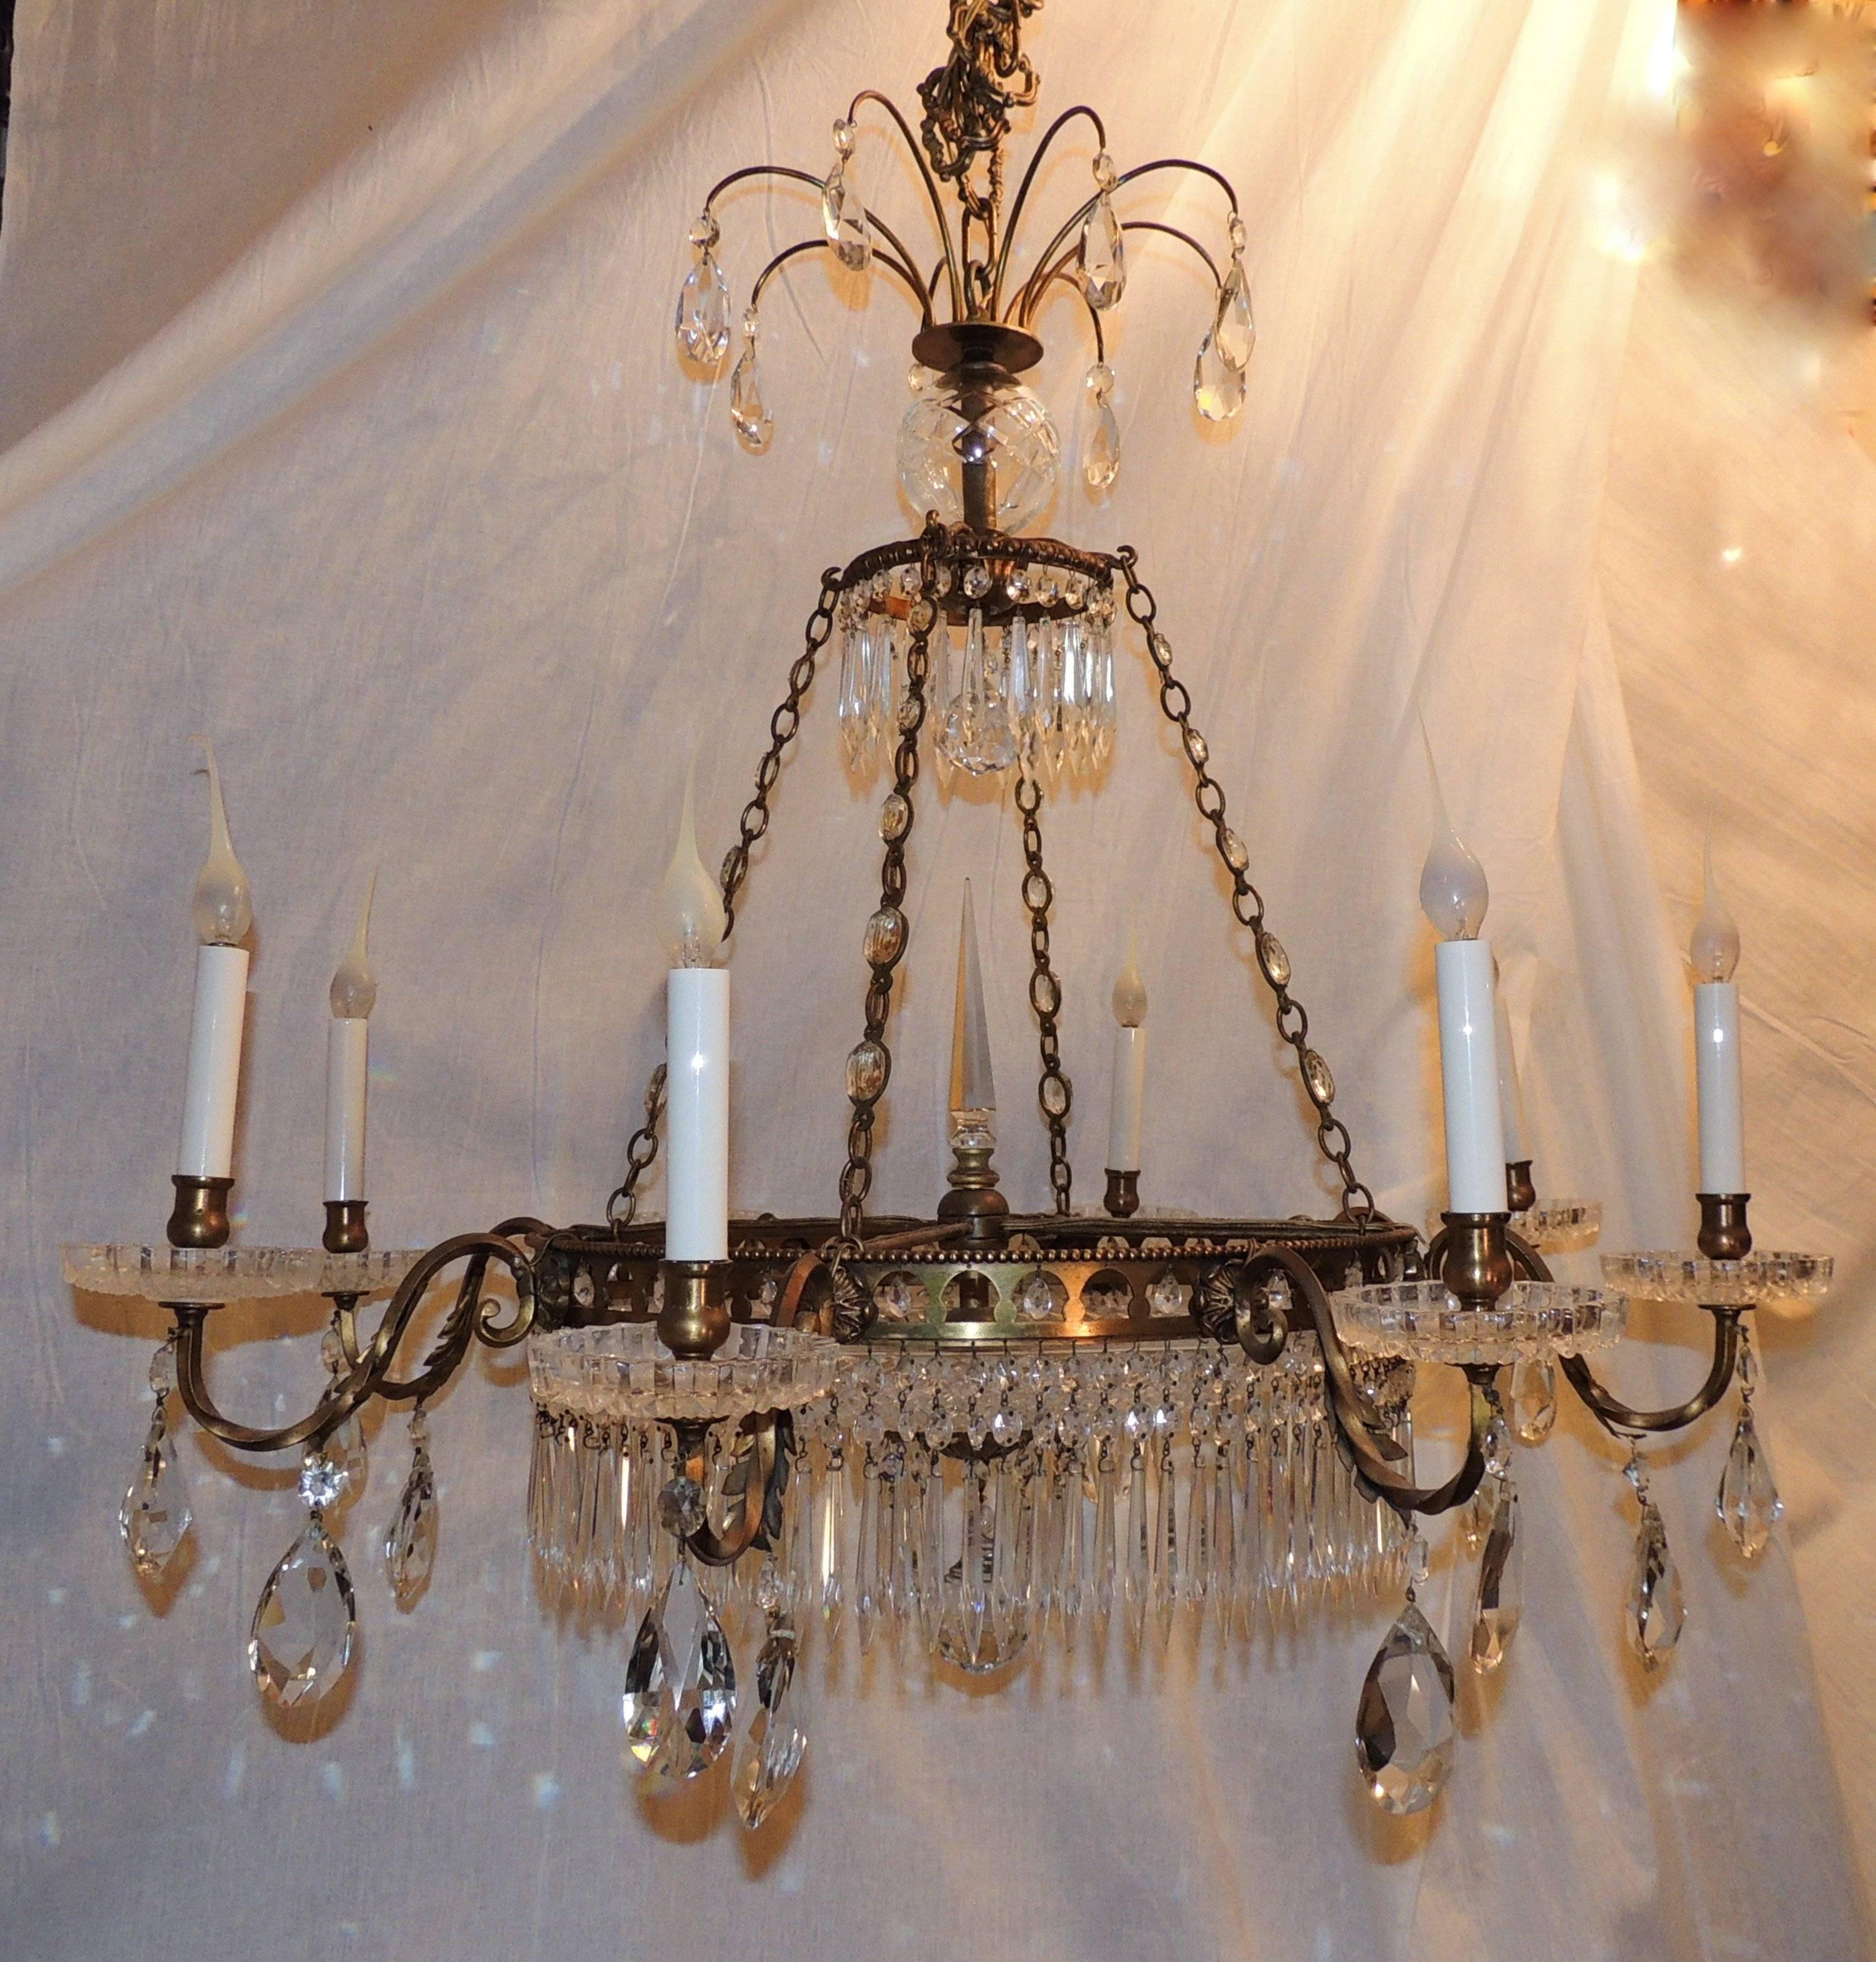 This wonderful gilt 12-light chandelier has four interior and eight arms decorated with rock crystal drops, rock crystals and crystal spears surrounding a multifaceted crystal plate. The crystals are also in the chain, the edge of the chandelier and